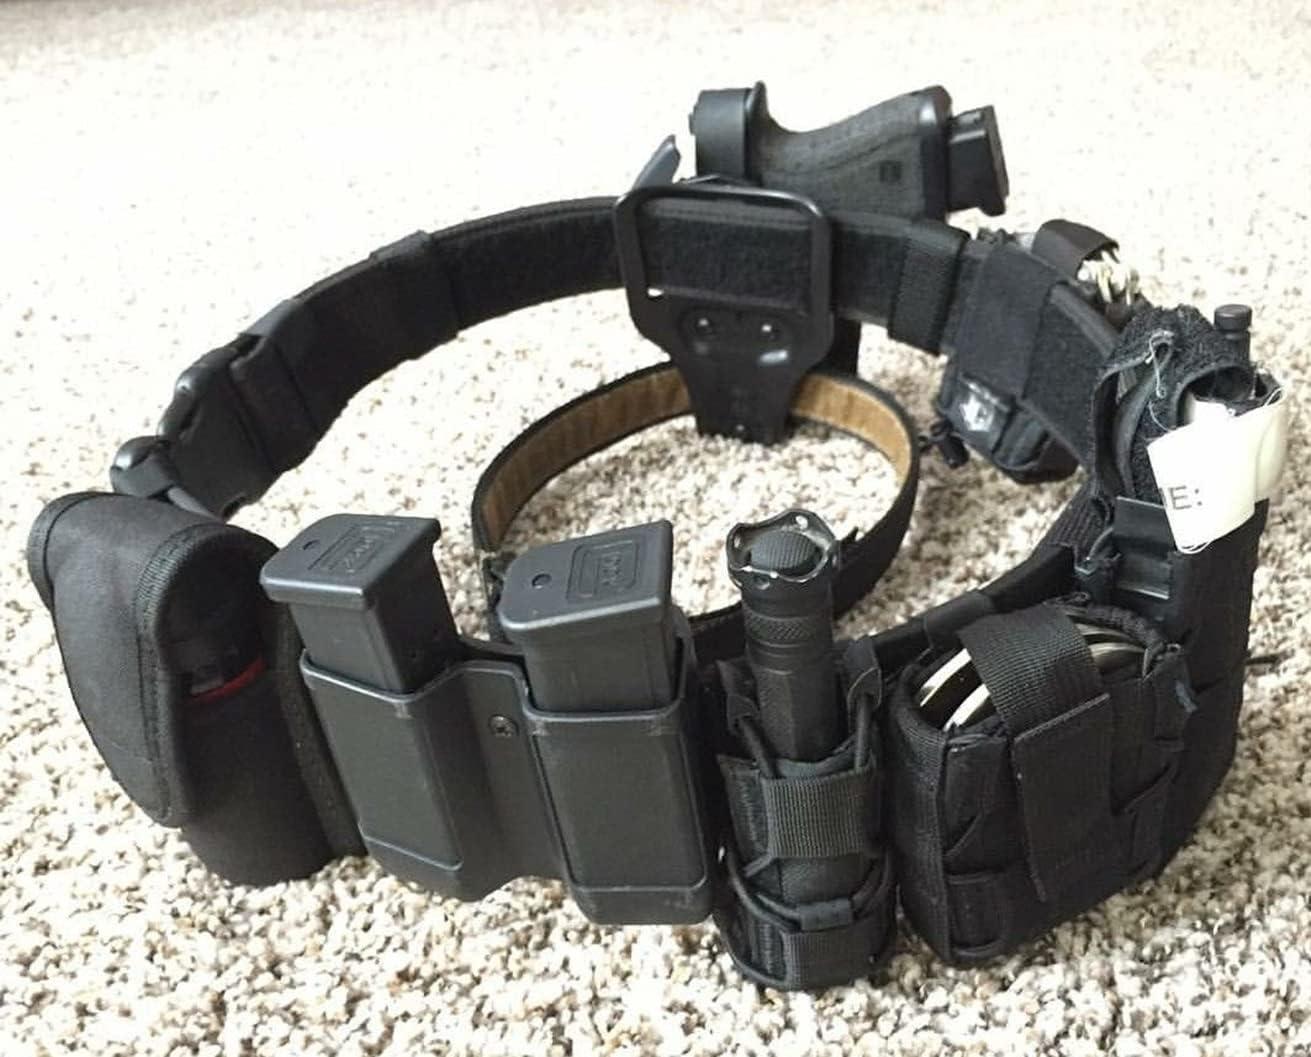 Handcuff Holster ,Open-Top Handcuff Pouch,Handcuff Case Fit Asp Handcuff /  Hinged Handcuff / Chain Handcuff / Folding Rigid Handcuff,Law Enforcement Cuff  Holder,Compatible MOLLE/Various Work Belts